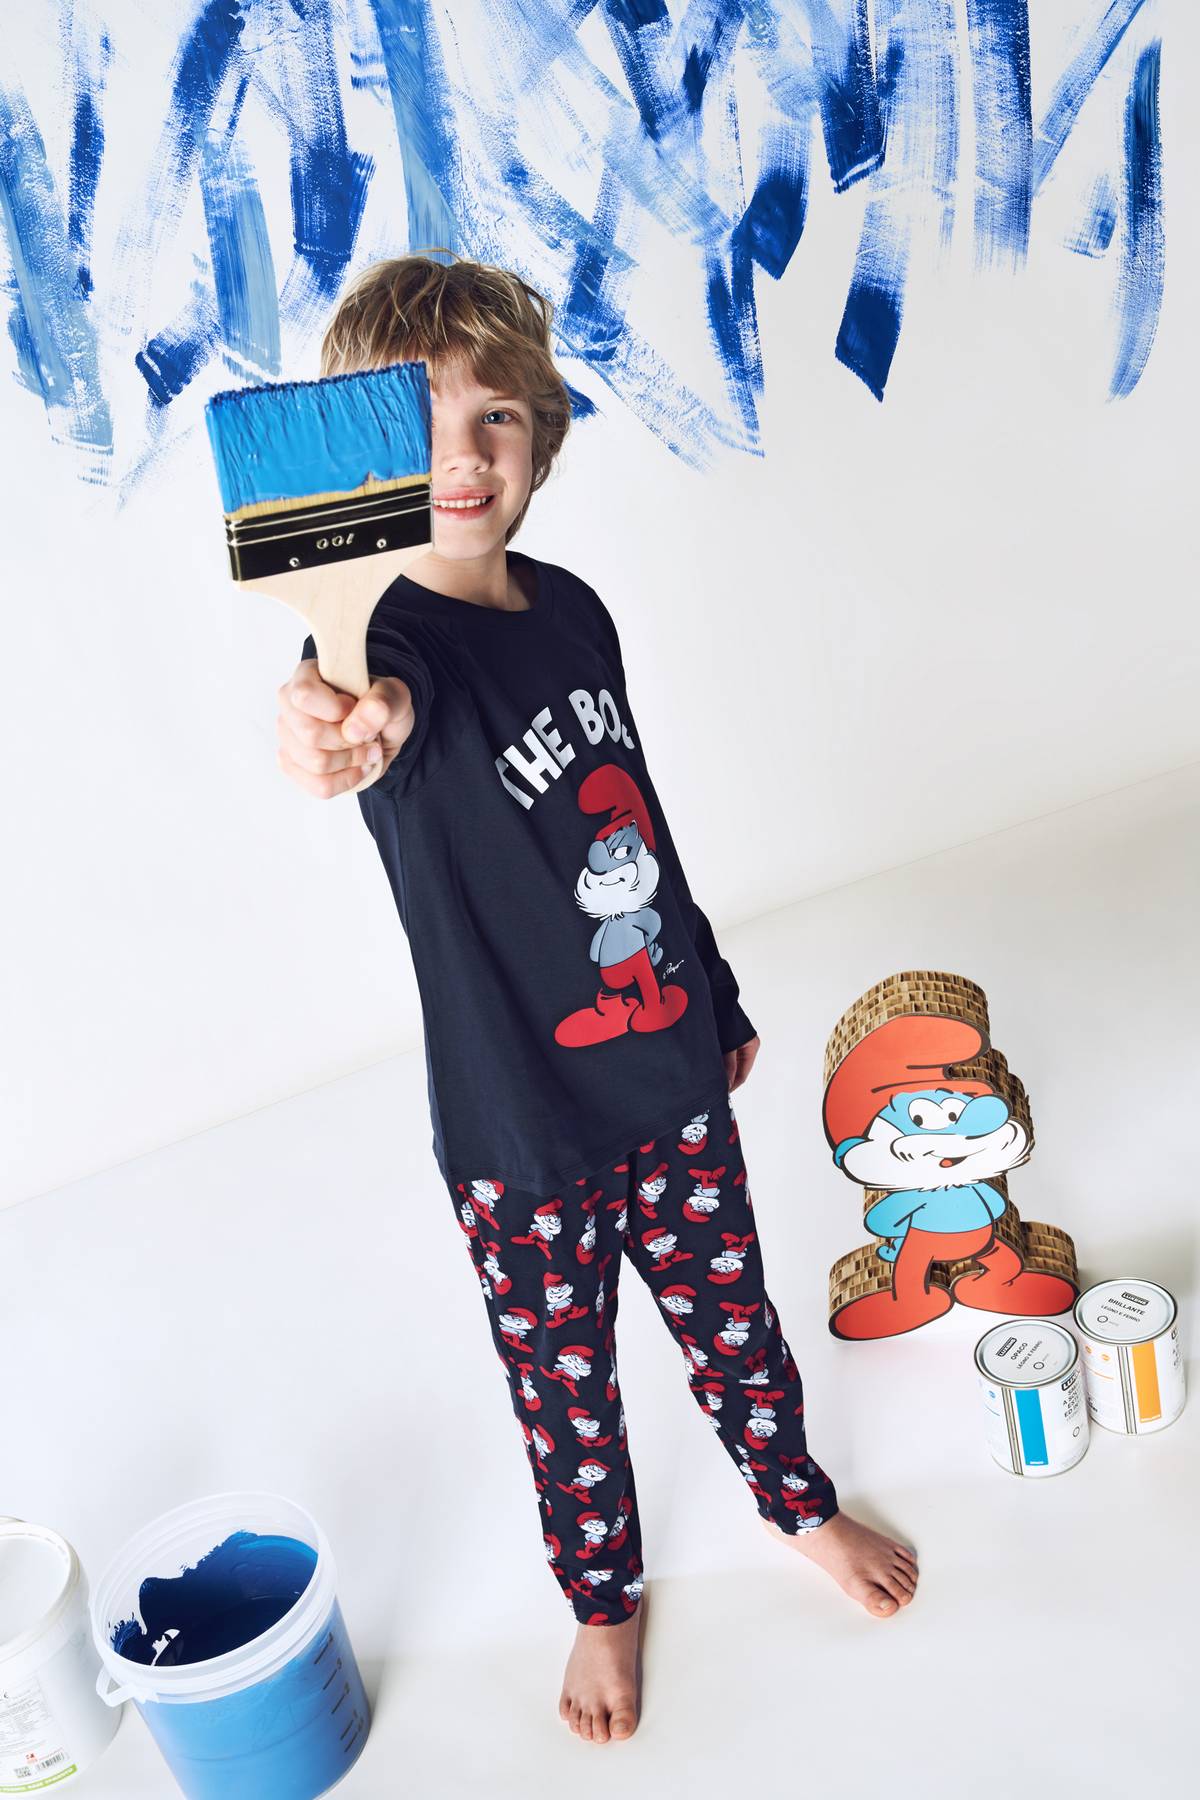 Smurfs Capsule Collection Calin Group S A